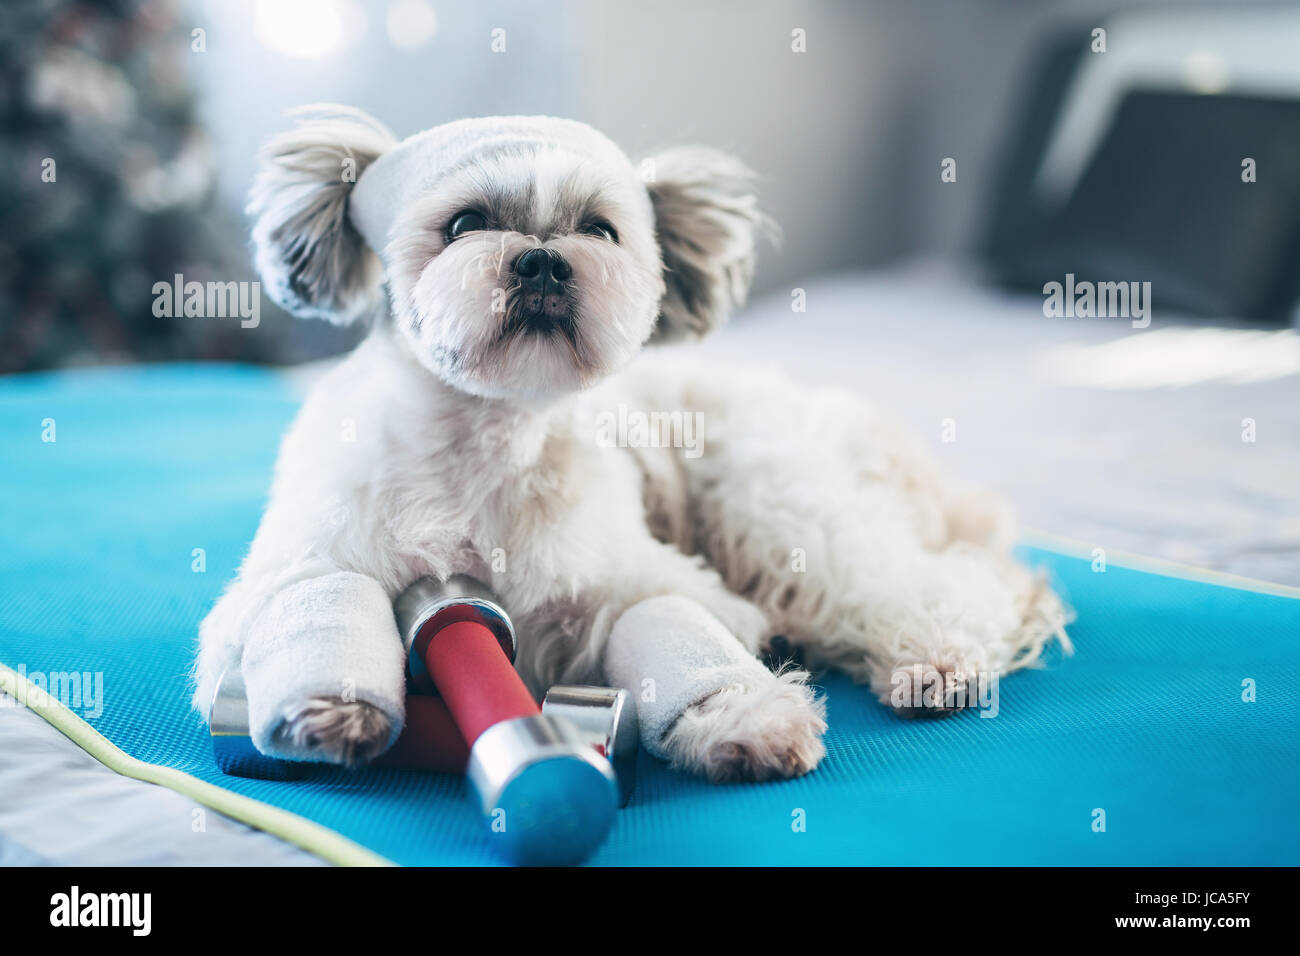 Shih tzu dog fitness style concept. Lying on mat with dumbbells and sports clothing. Bright white colors. Stock Photo